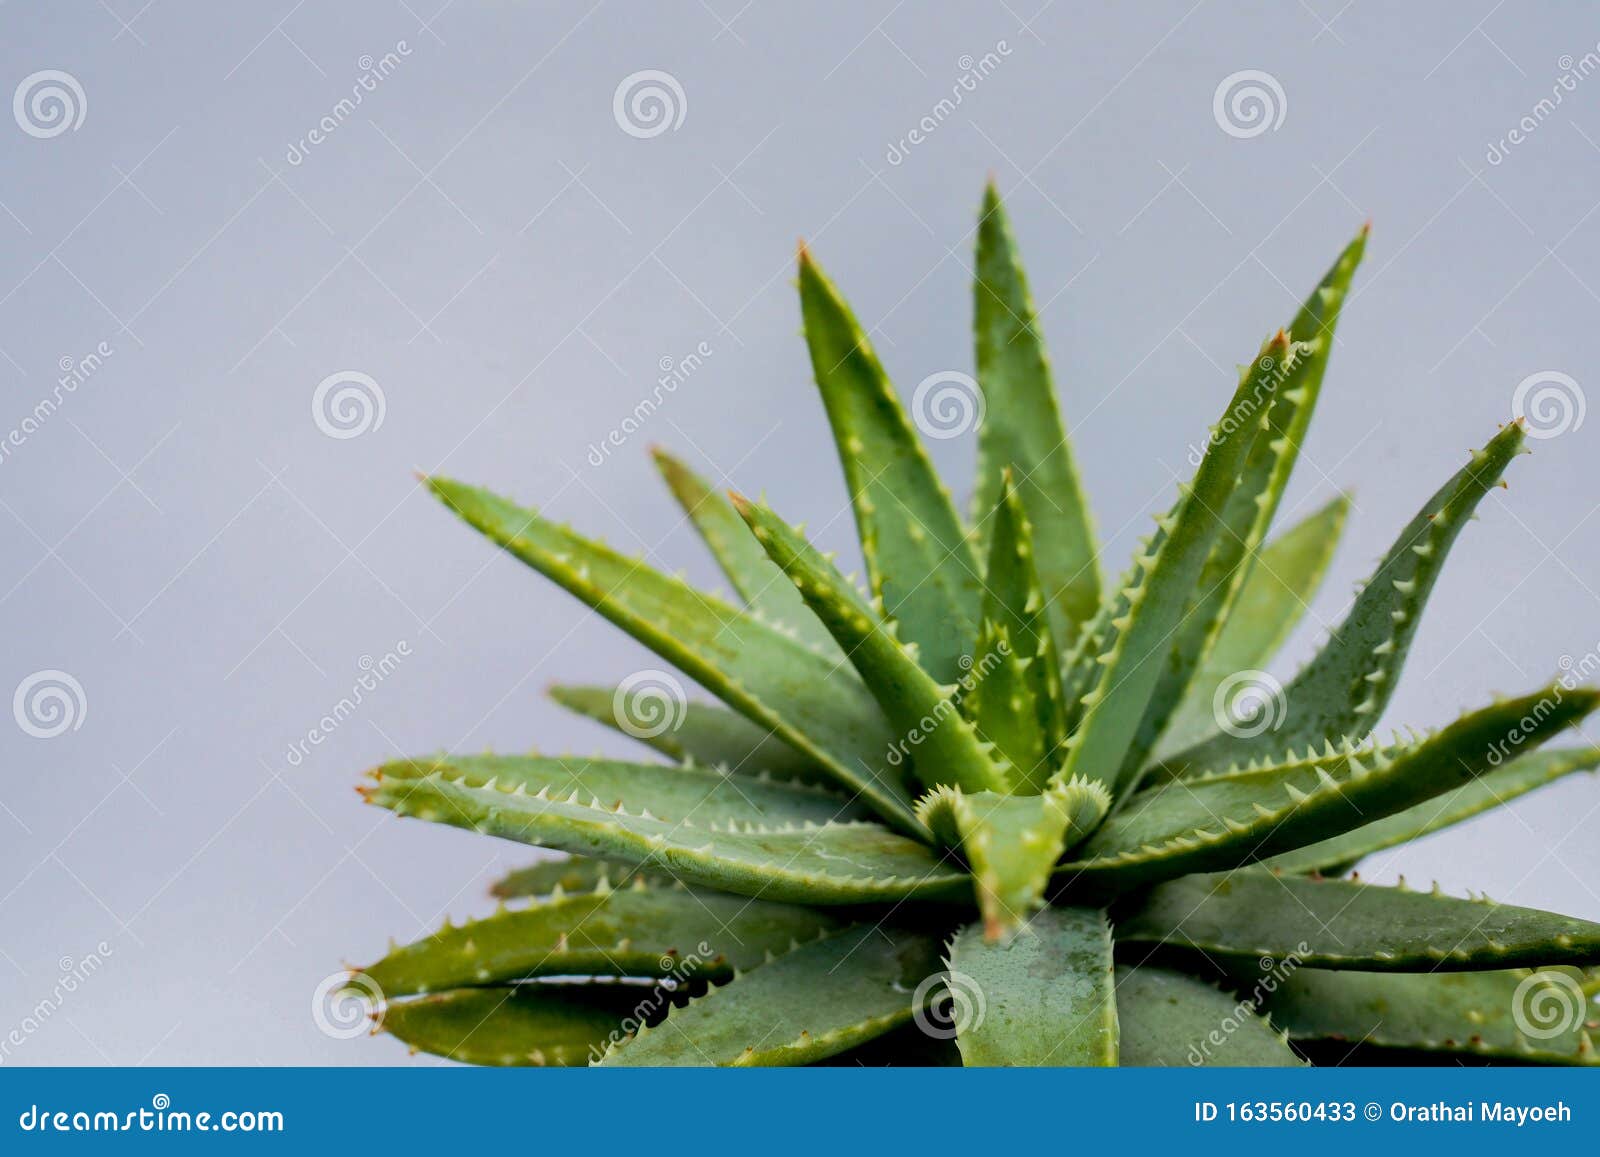 Aloe Vera Gel That Has Both Substances To Cure Scars And Used To